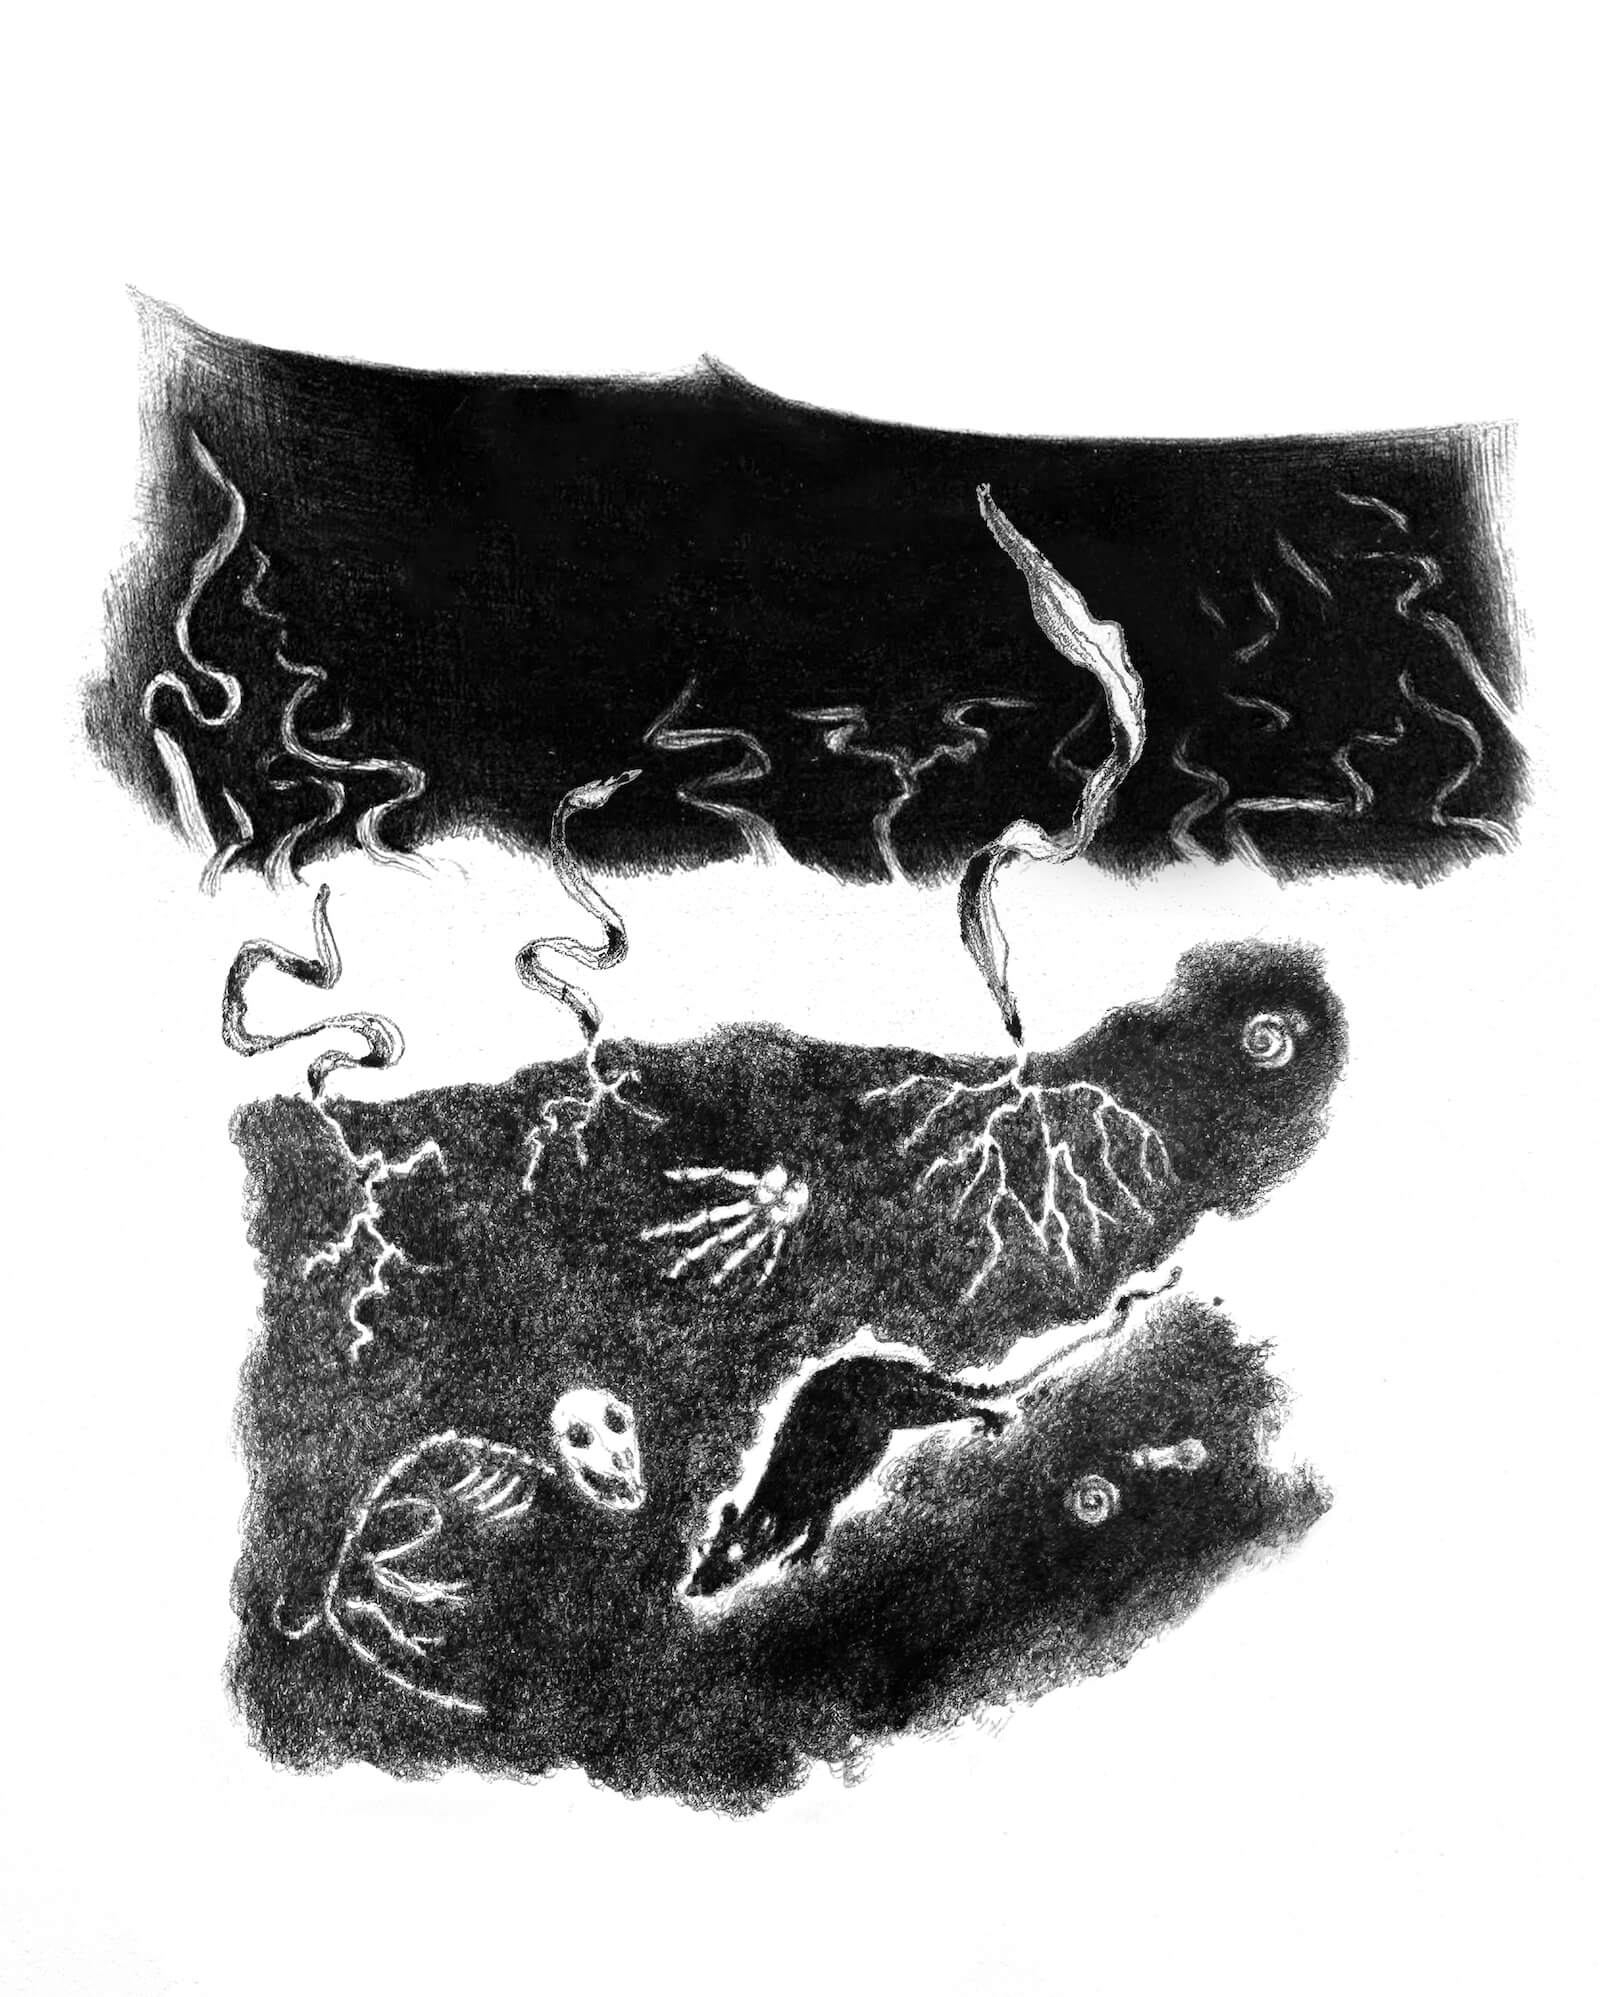 Scene 10:
Tunneling through the earth under the thick peat and water reeds: we feel wet dirt and webbed roots and bones and shells and stones, meandering claw-dug burrows of fossorial critters, the skeletal remains of a shrew…

When we move the x-ray widget over the dirt, the animal burrow expands as if it’s being dug out in real time. An animal is pawing a tunnel toward the skeleton. It’s a living descendent: a determined vole with bright eyes and a long tail.